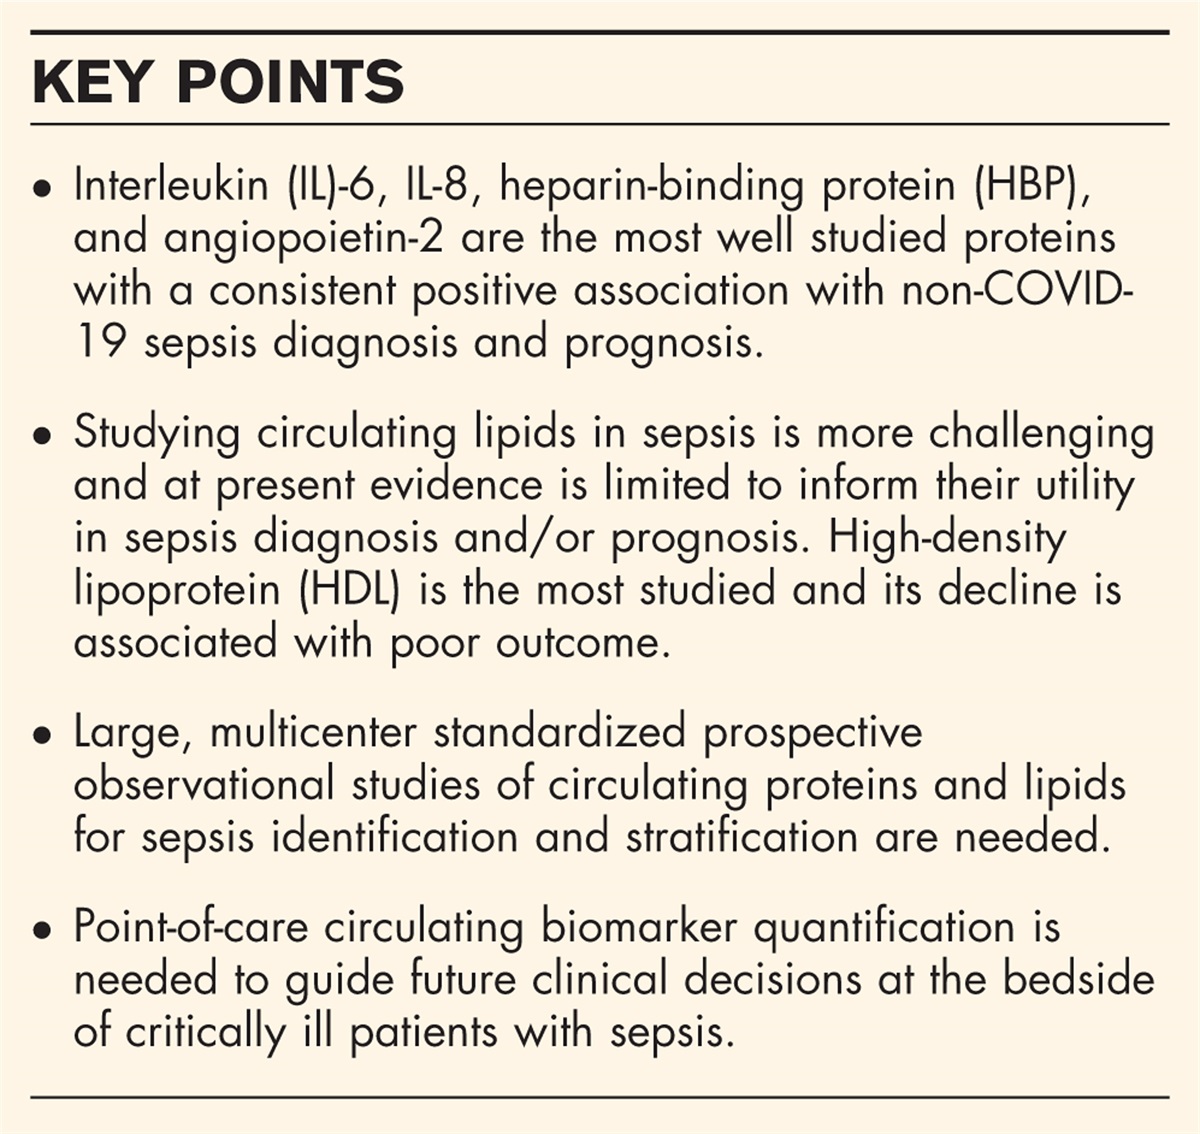 Circulating protein and lipid markers of early sepsis diagnosis and prognosis: a scoping review